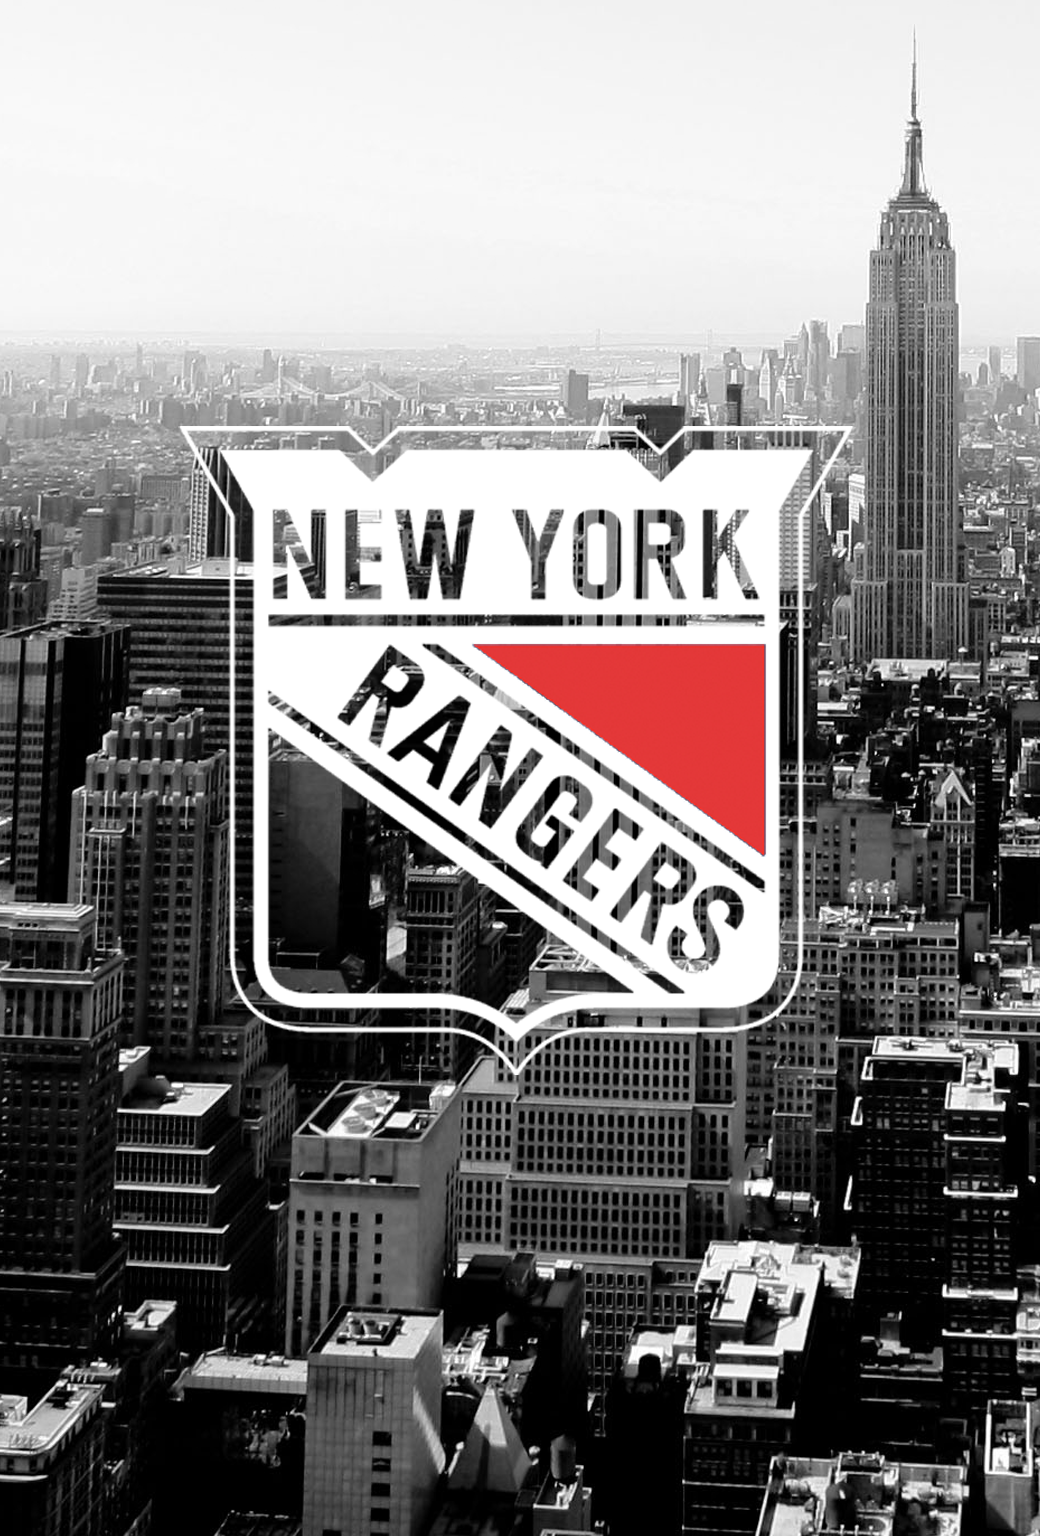 New York Rangers Nyc Skyline Mobile Wallpaper iPhone Or 5s